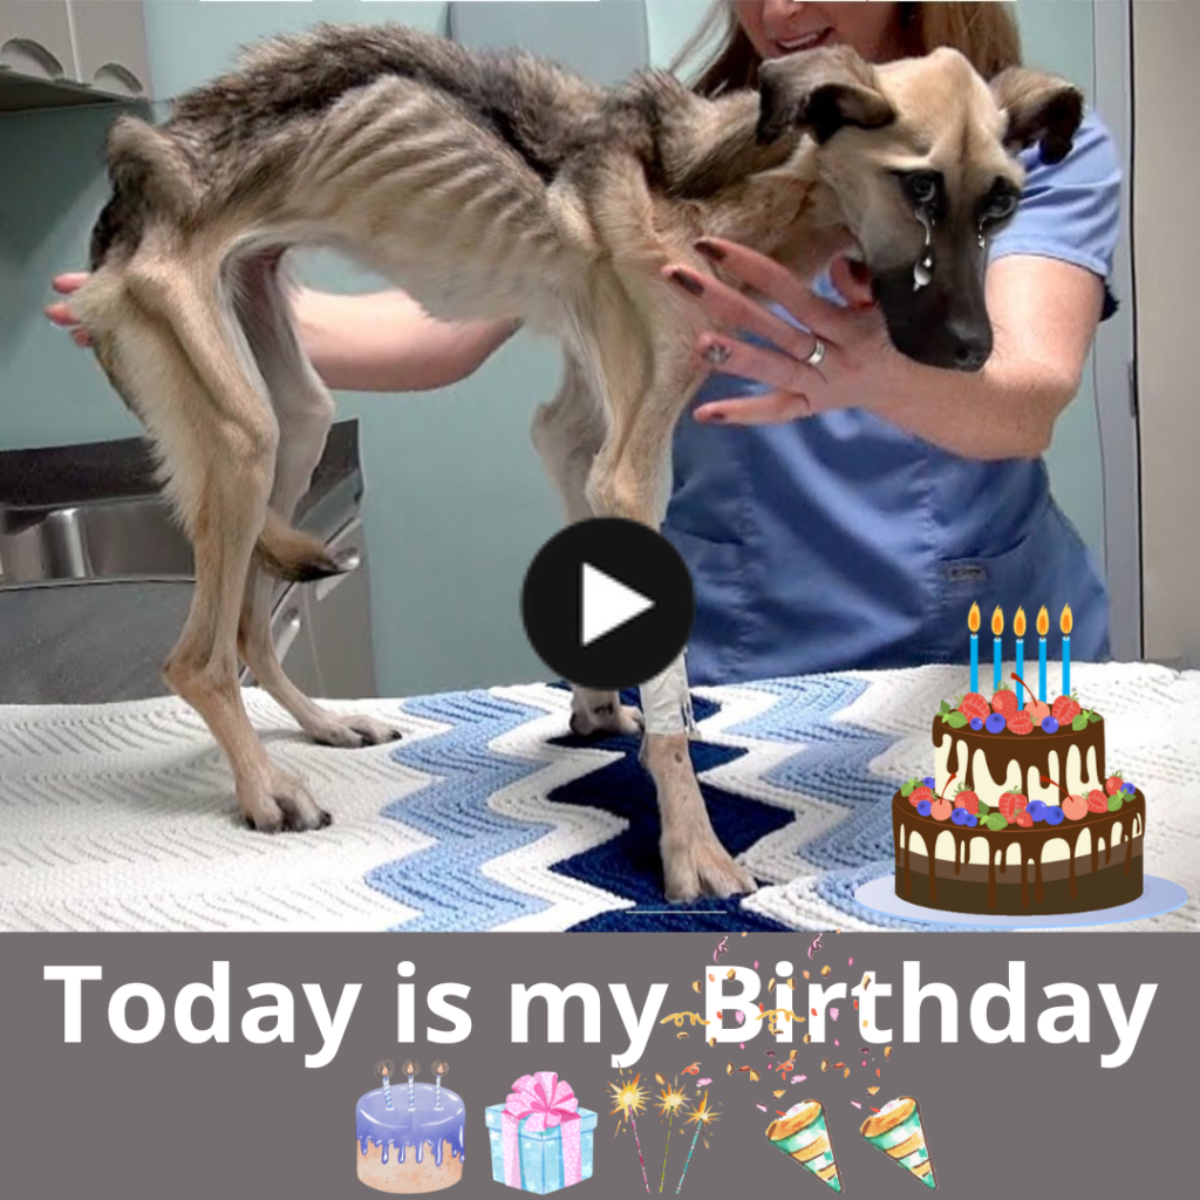 A Birthday of Redemption: A Canine Resurrection from Starvation